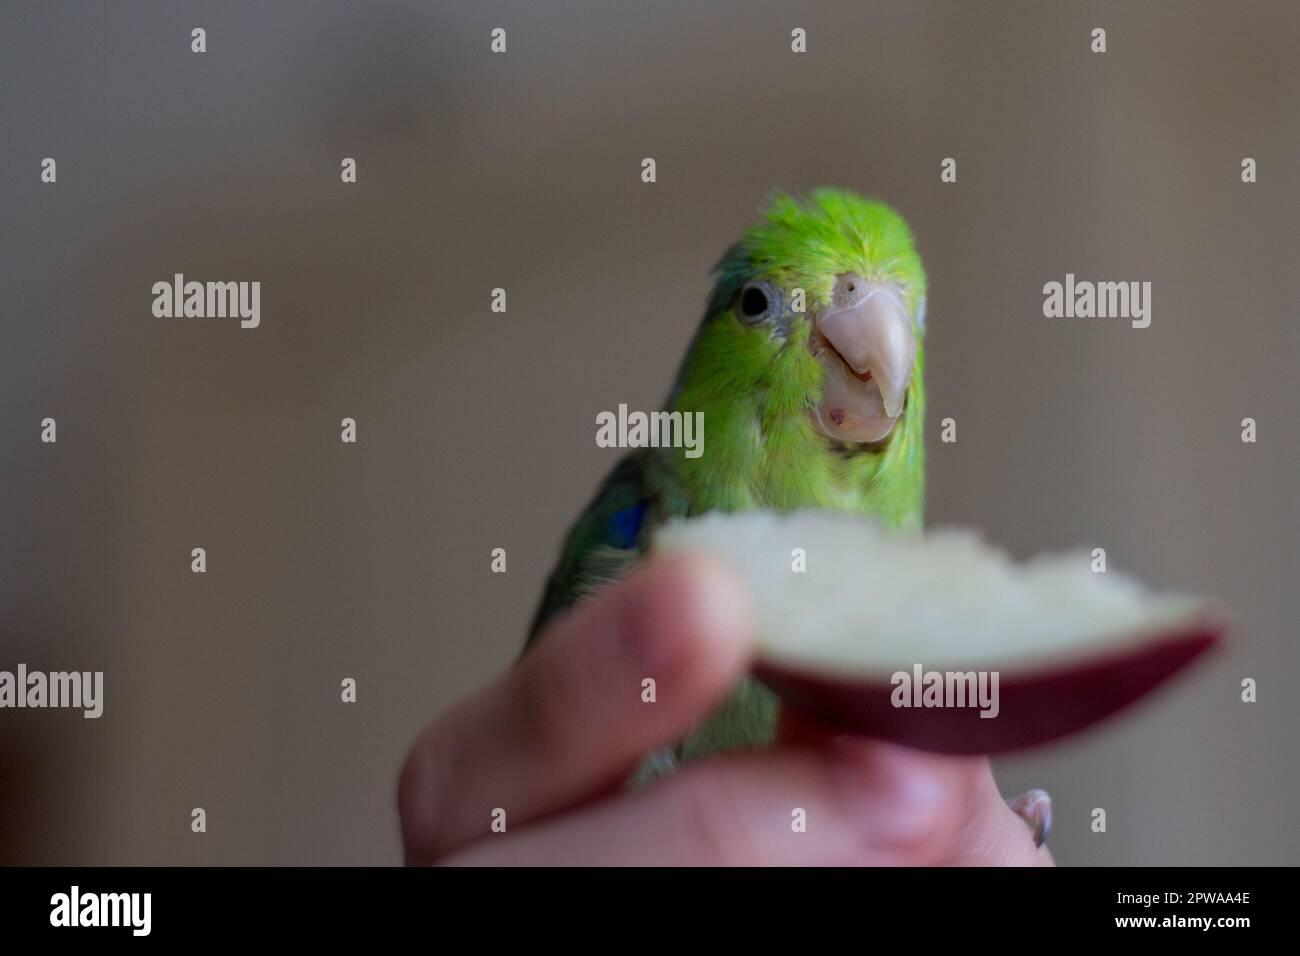 Pacific parakeet, Forpus domestica eats apple from a woman's hand Stock Photo